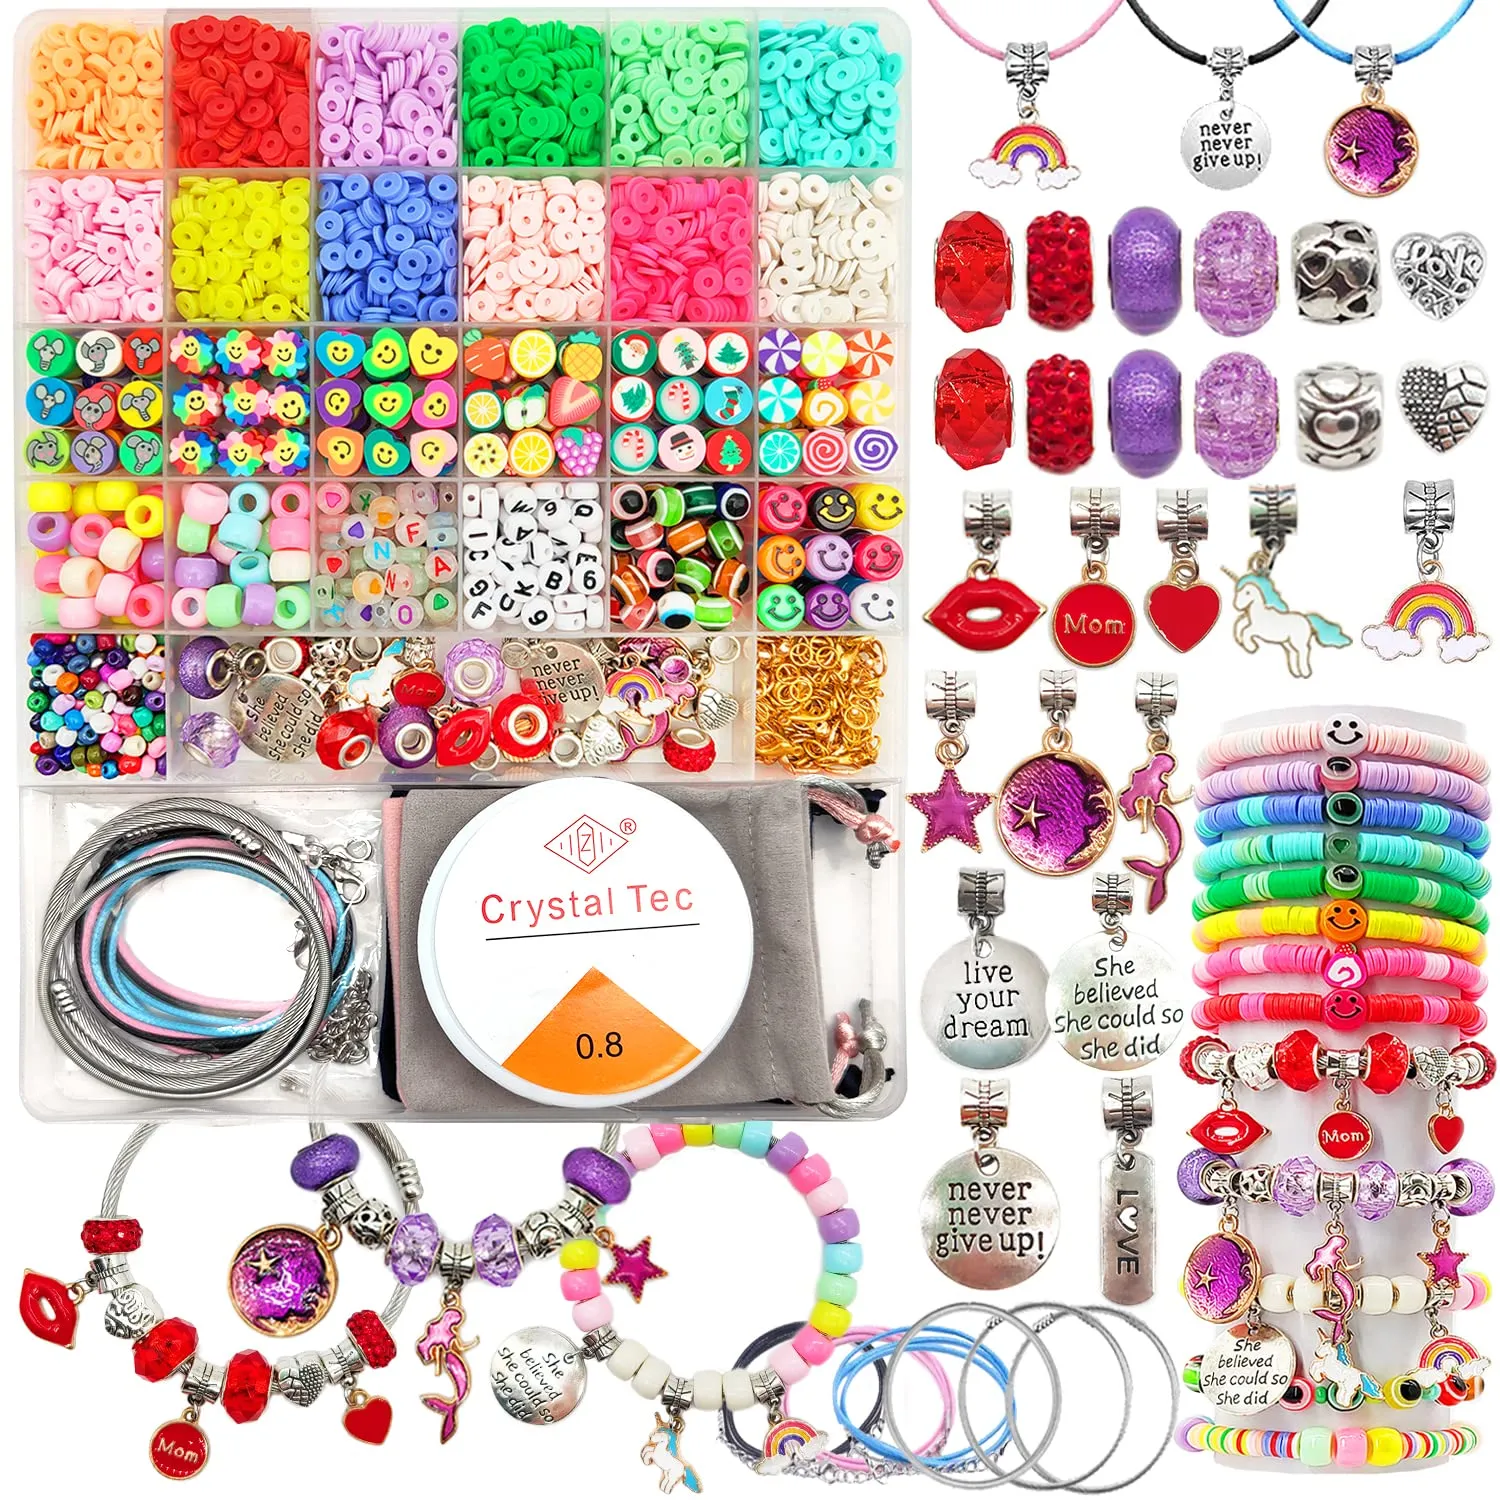 Toys Bracelet Making Kit -3100pcs Beads for Charm Jewelry Making Kit Supplies DIY Arts Halloween and Christmas Party Favors Crafts for Kids Girl Toys Age 6-7